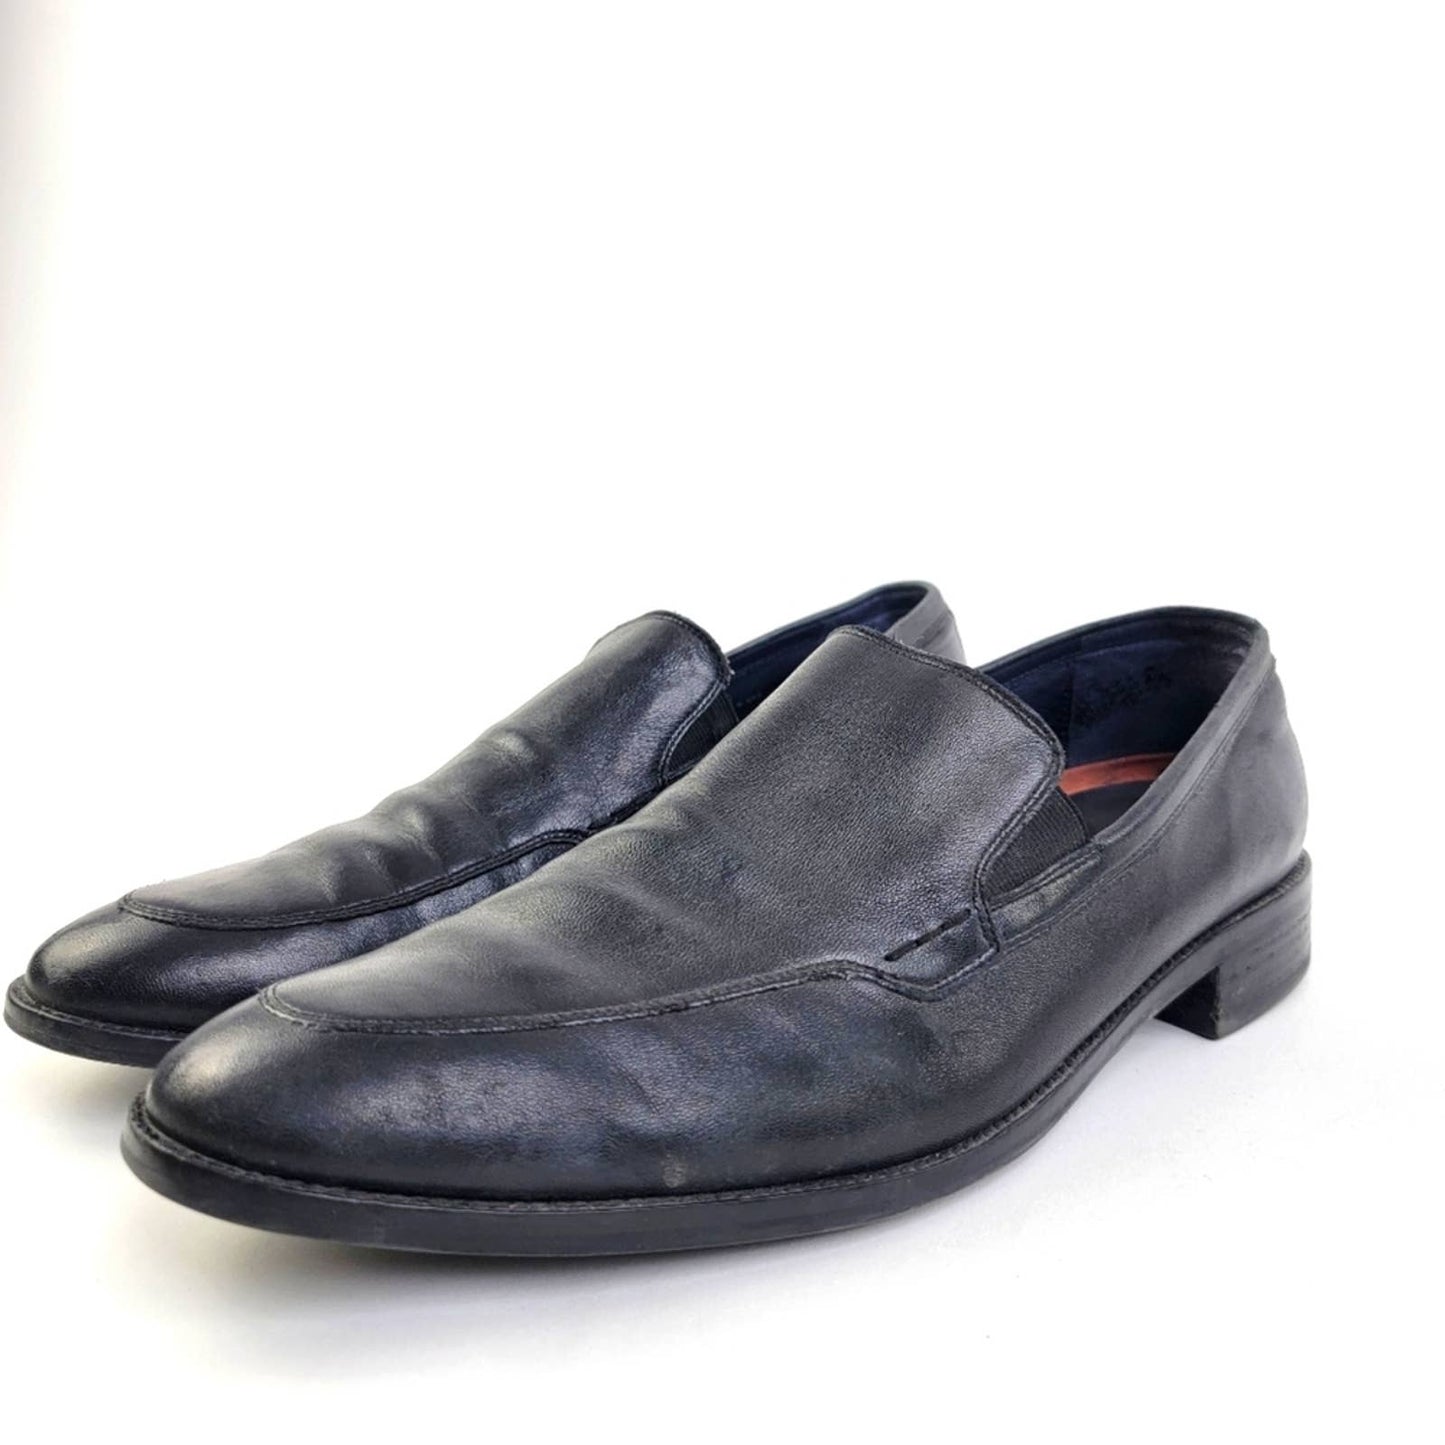 Cole Haan Grand OS Lenox Hill Venetian Black Leather Slip On Dress Loafers - 12